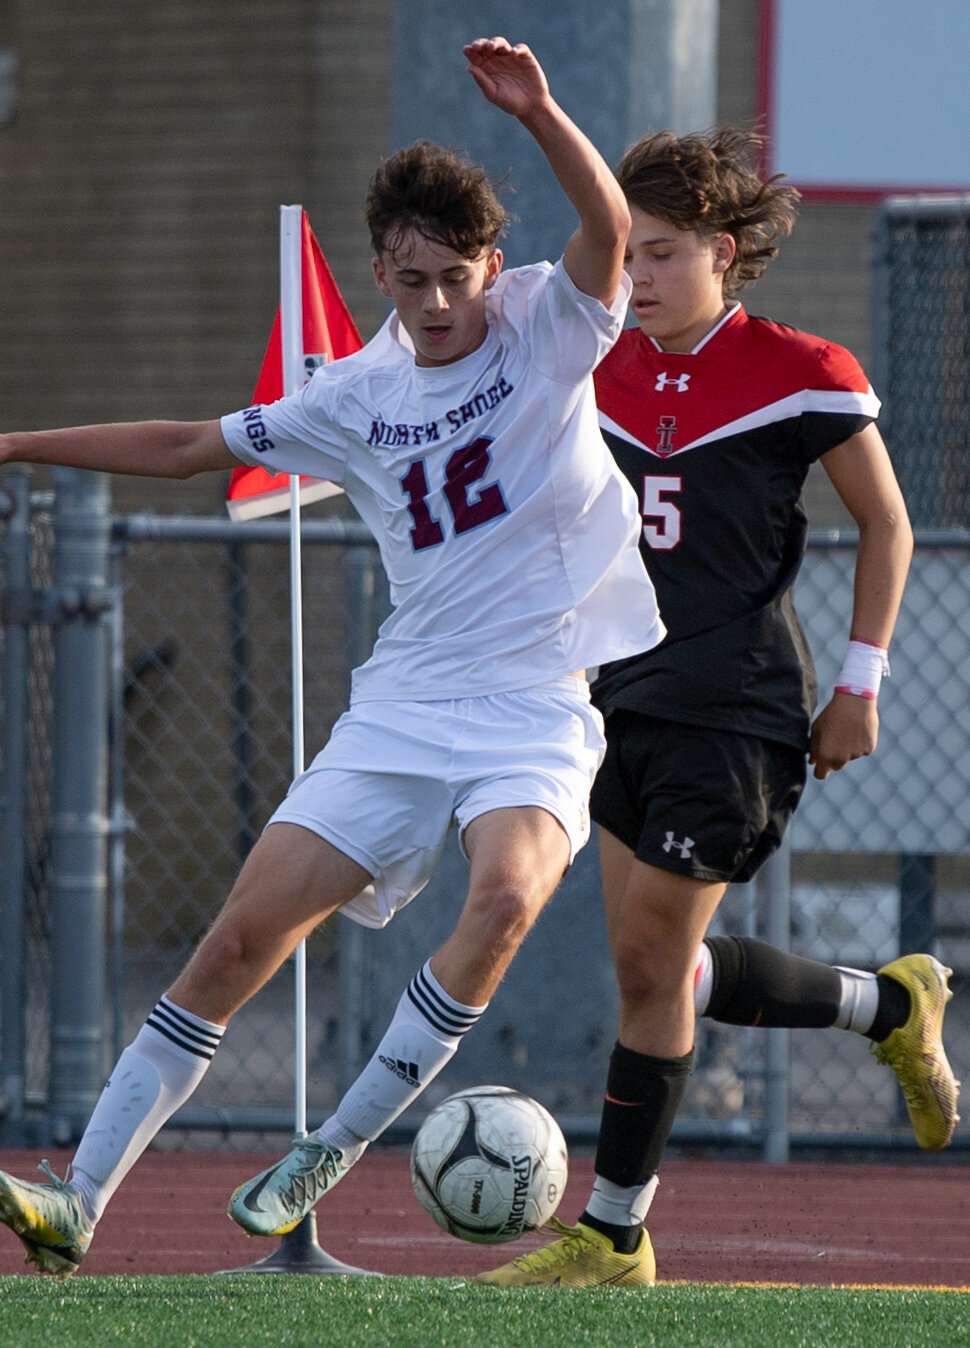 Junior Owen Jenson has contributed to North Shore’s seven-game unbeaten streak (6-0-1) with five points.